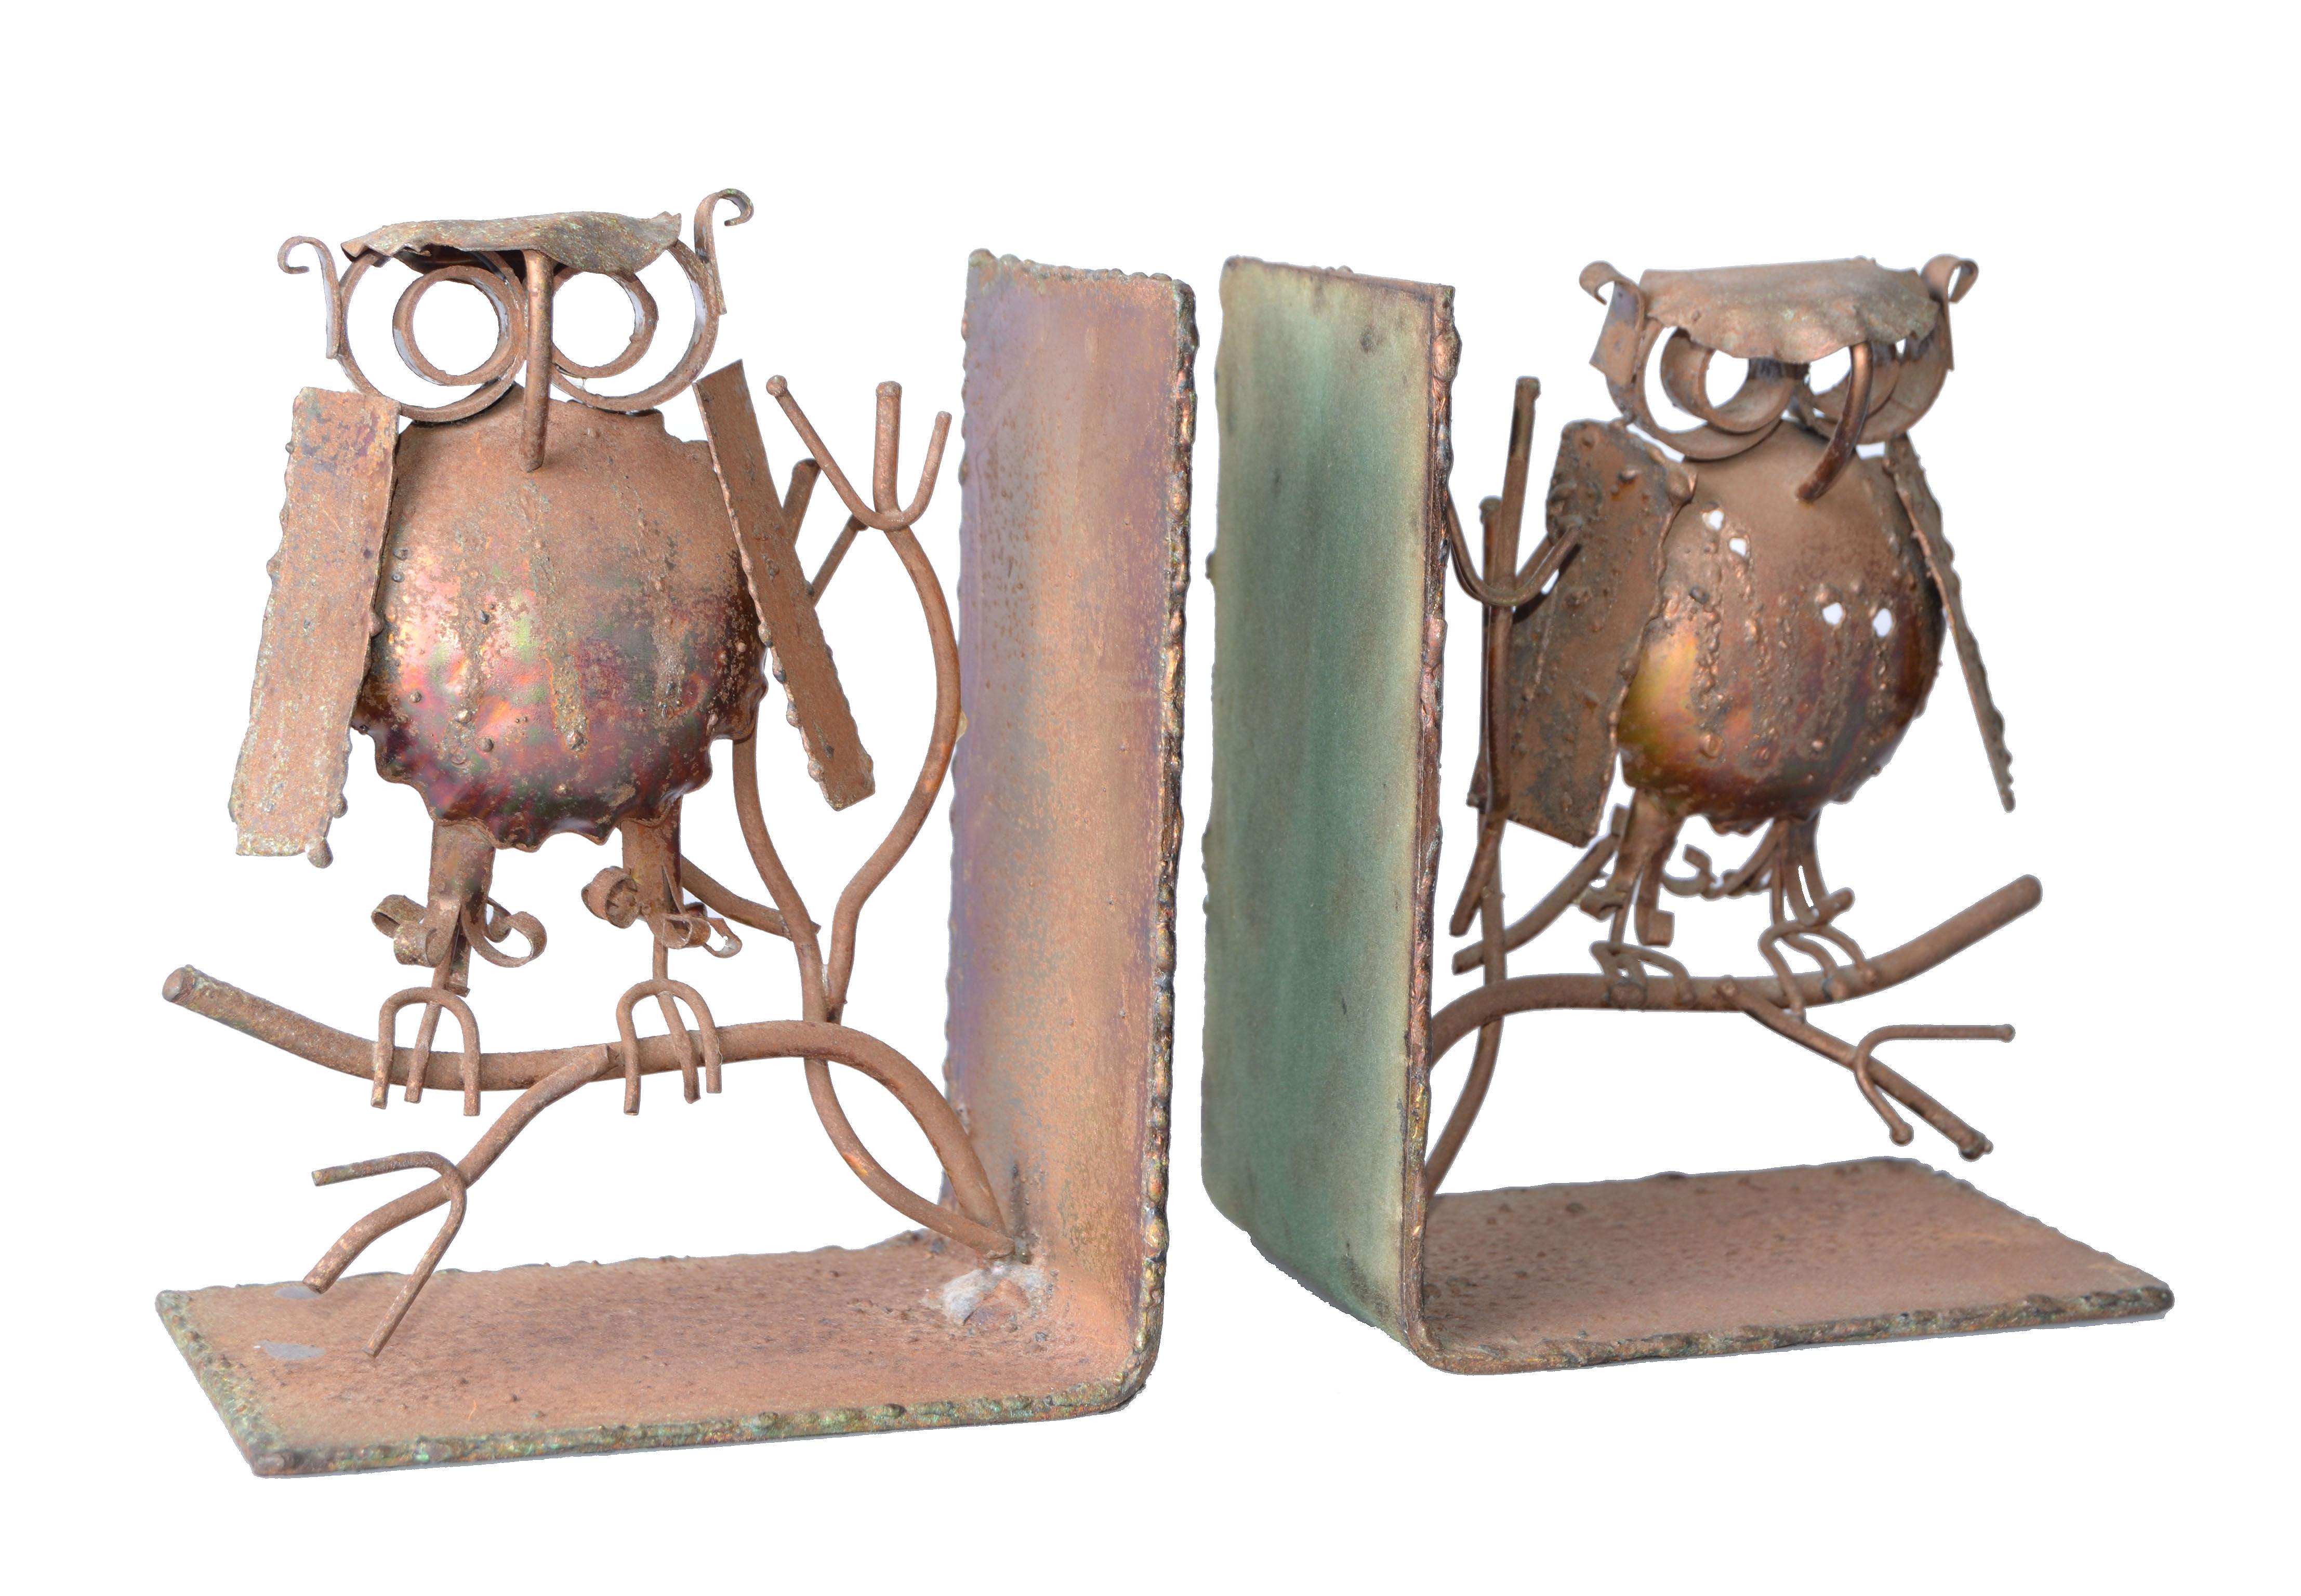 Original Curtis Jere copper owl bookends. No signature.
In original condition.
Priced for the pair.